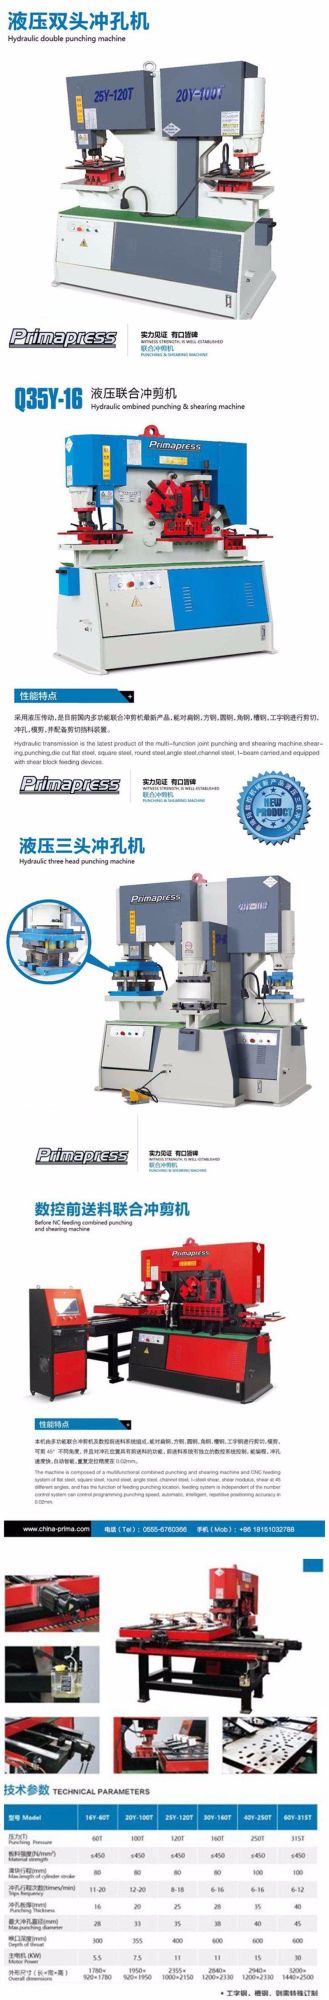 High Efficient Q35y Combined Iron Worker Machine Metal Punching Cutting Machine